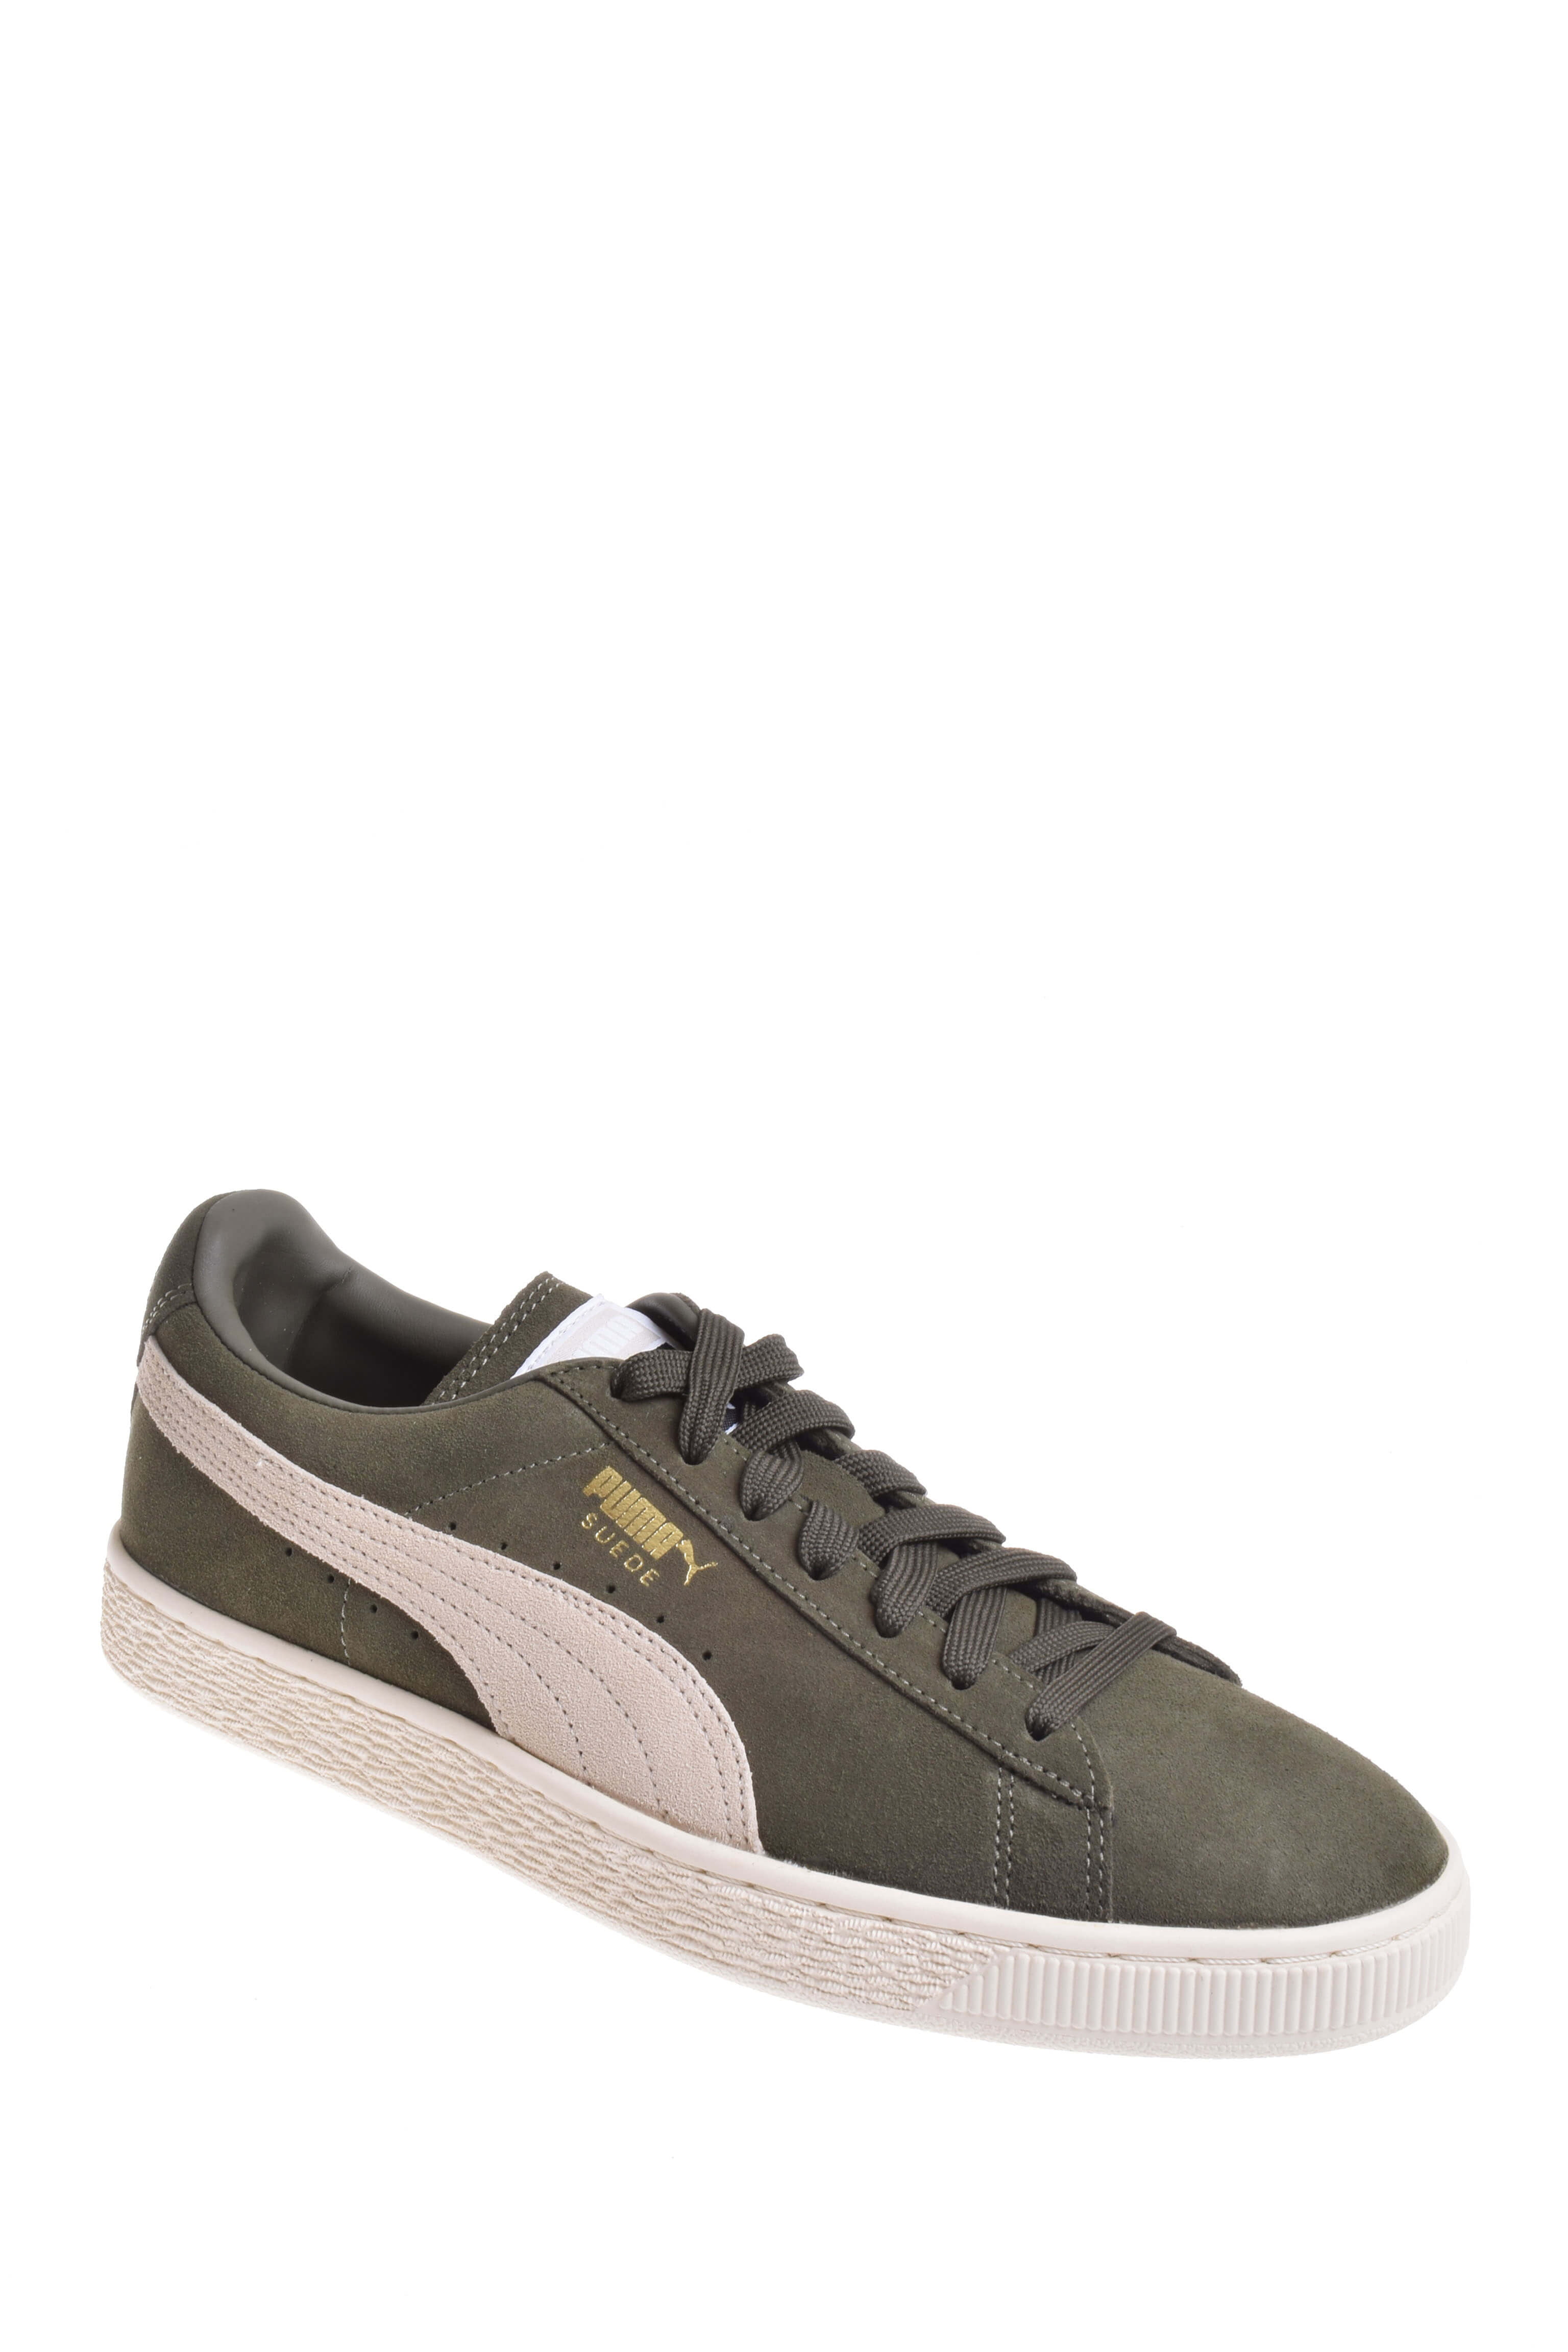 olive green puma sneakers